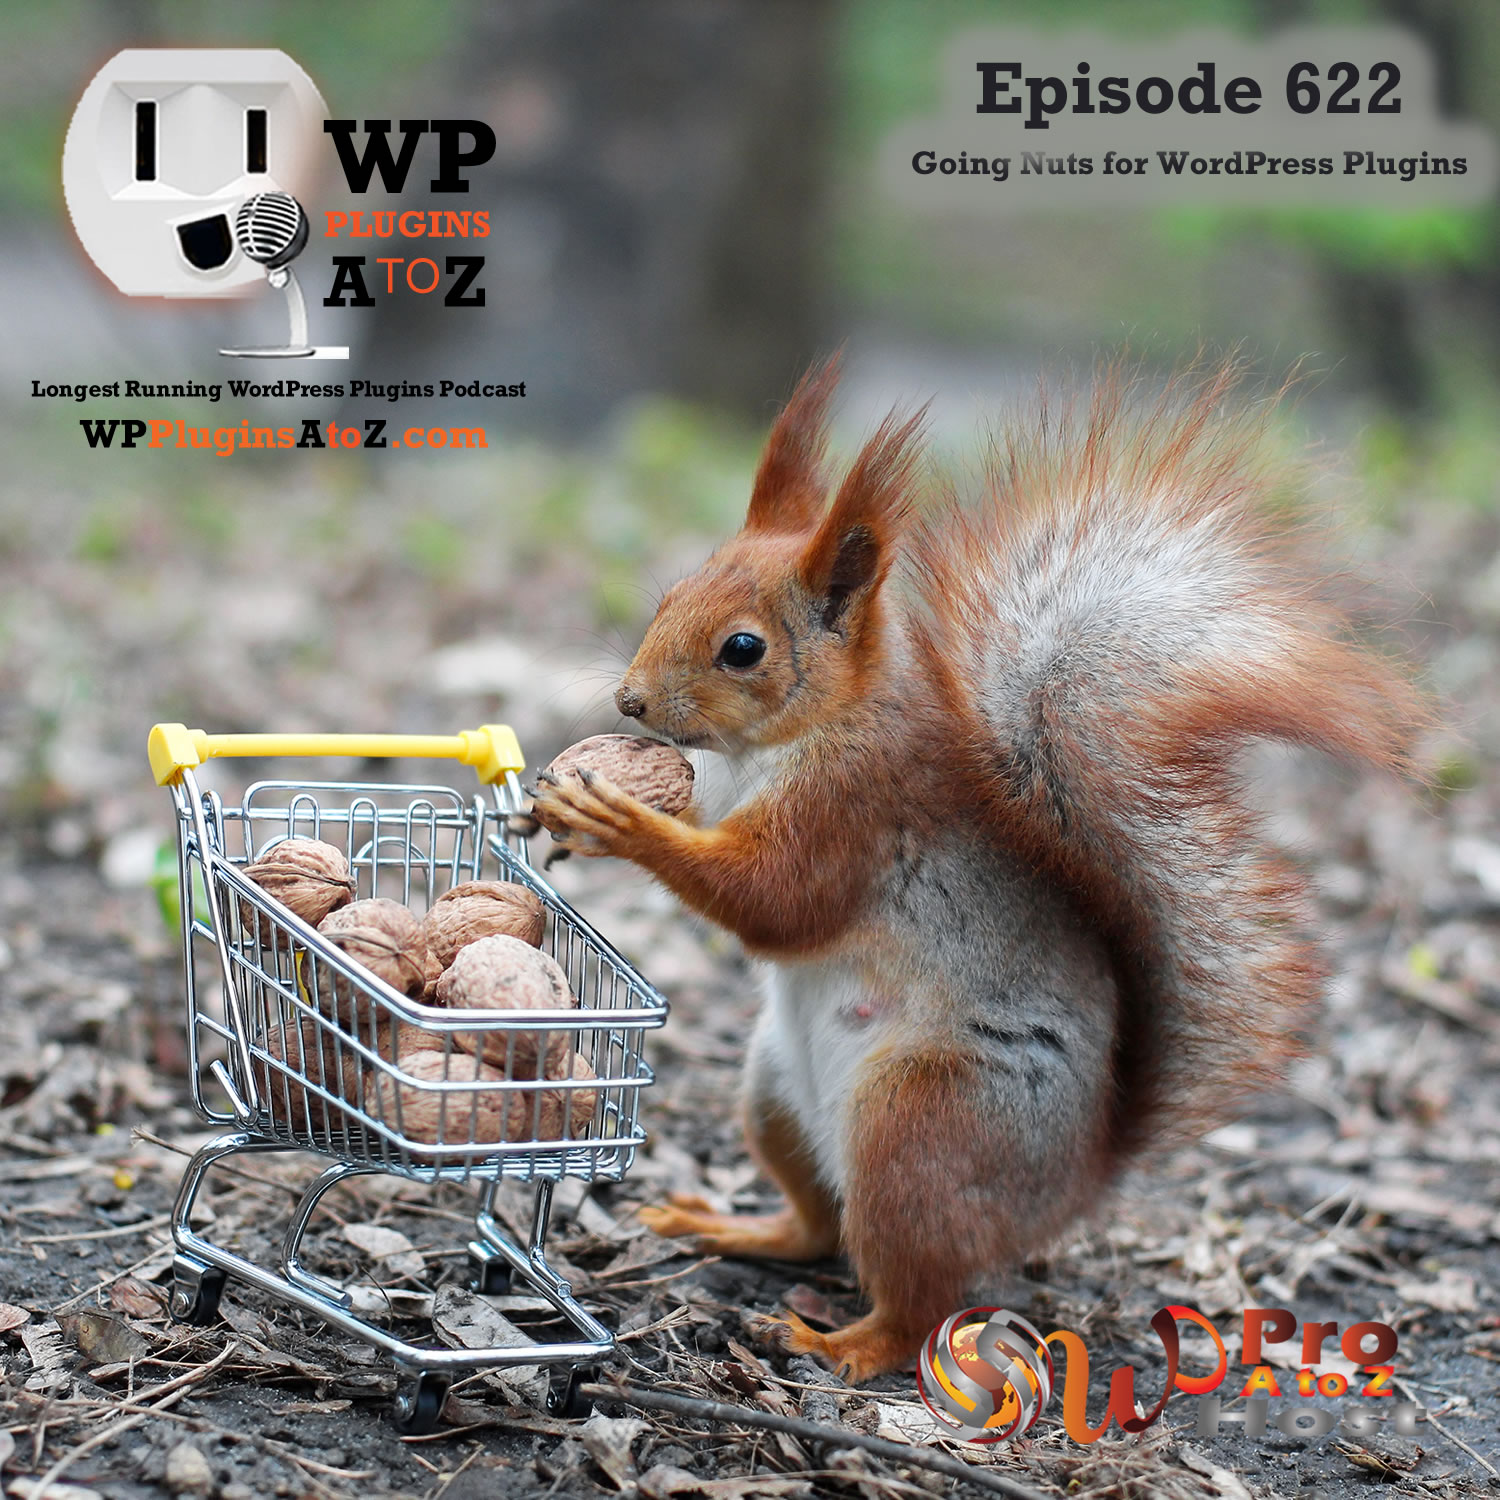 It's Episode 622 and we have plugins for Conditional Displays, Logging in with IP's.. and WordPress News. It's all coming up on WordPress Plugins A-Z!